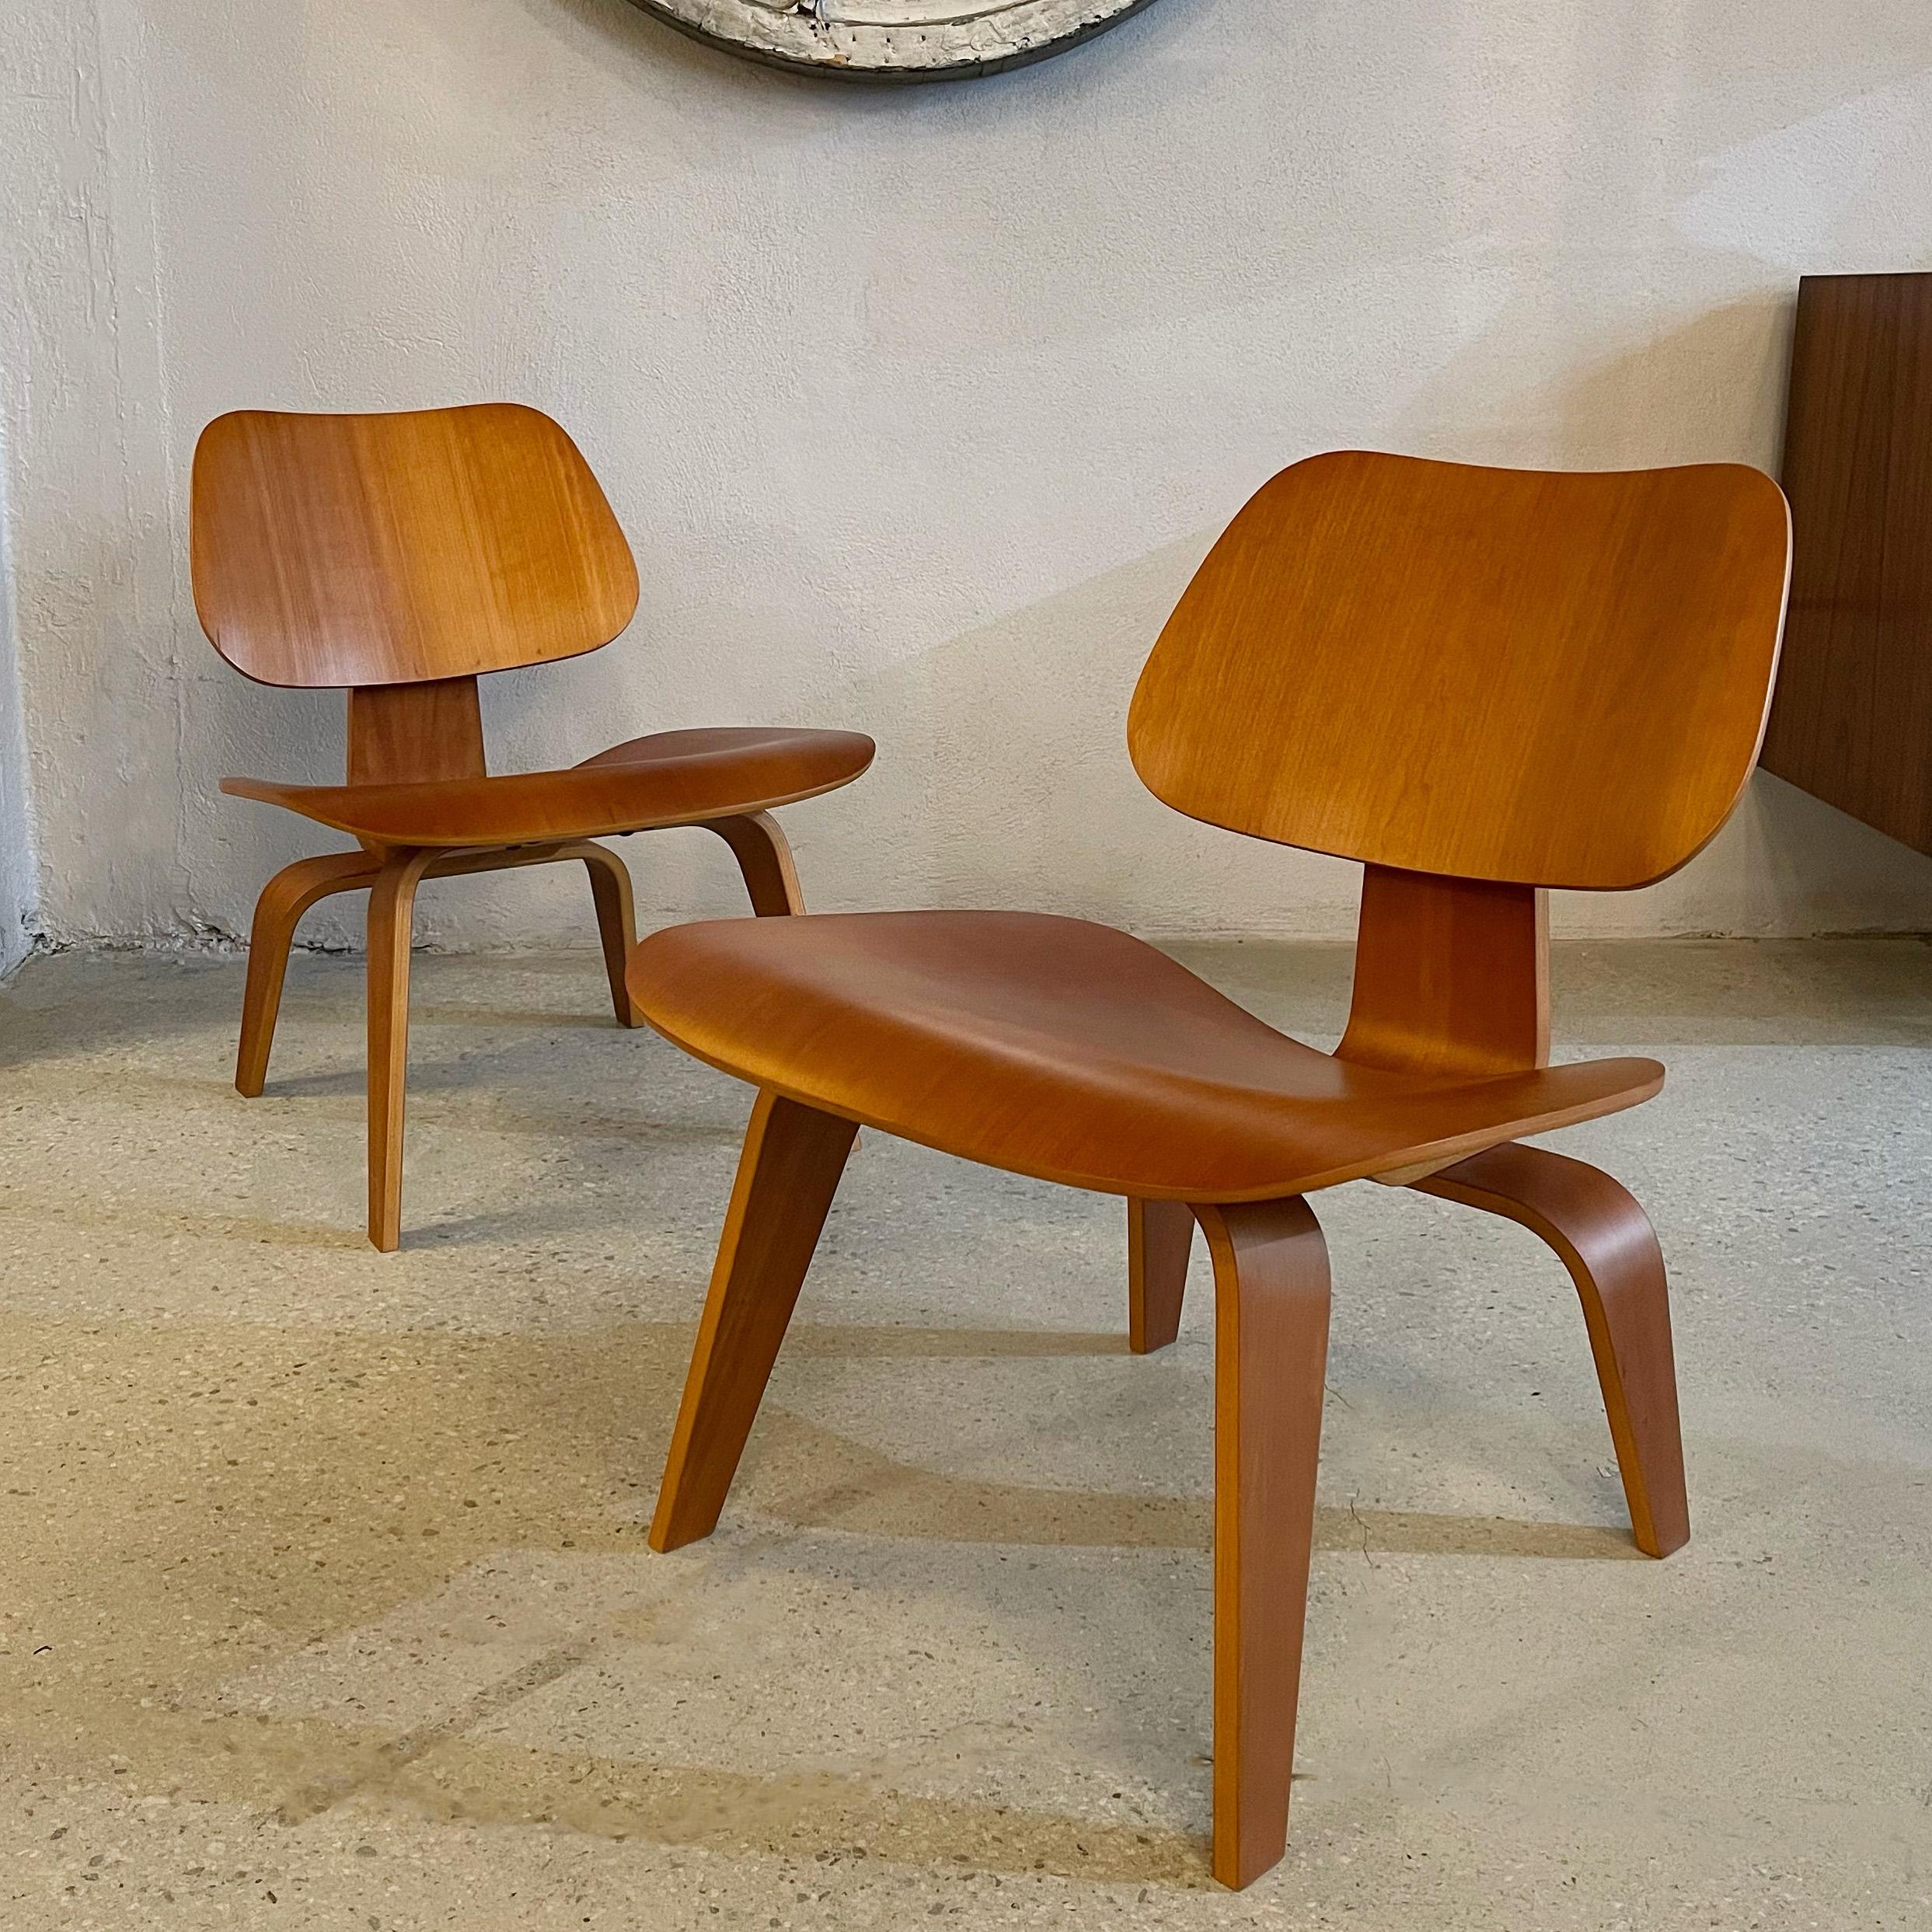 Pair of molded birch plywood LCW, low seated easy lounge chairs designed by Charles and Ray Eames for Herman Miller. Their black oval Herman Miller label indicates the pair is from the early 2000's. These organic, sculpted chairs are an iconic of